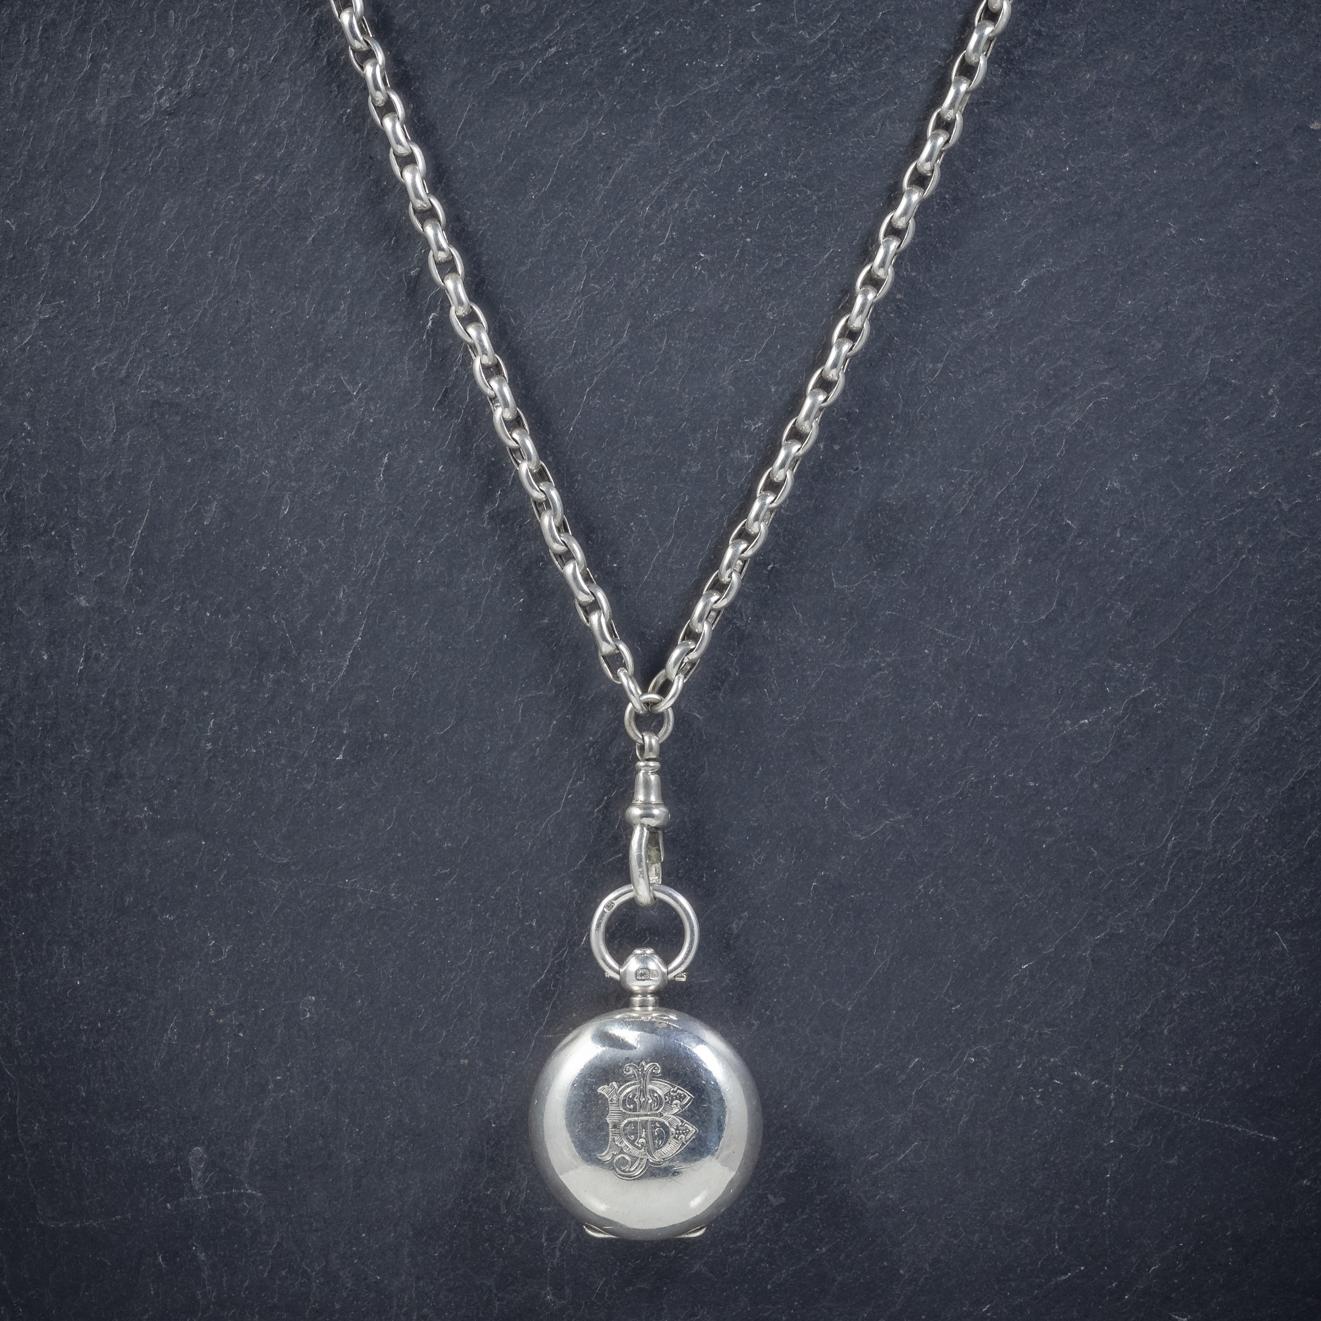 A grand antique Sterling Silver Locket and chain which is fully hallmarked and dated 1907.

The Locket is heavy and substantial and displays lovely engraved initials ‘B. J.’ on the front.

The locket opens up to reveal a well-preserved Coin case